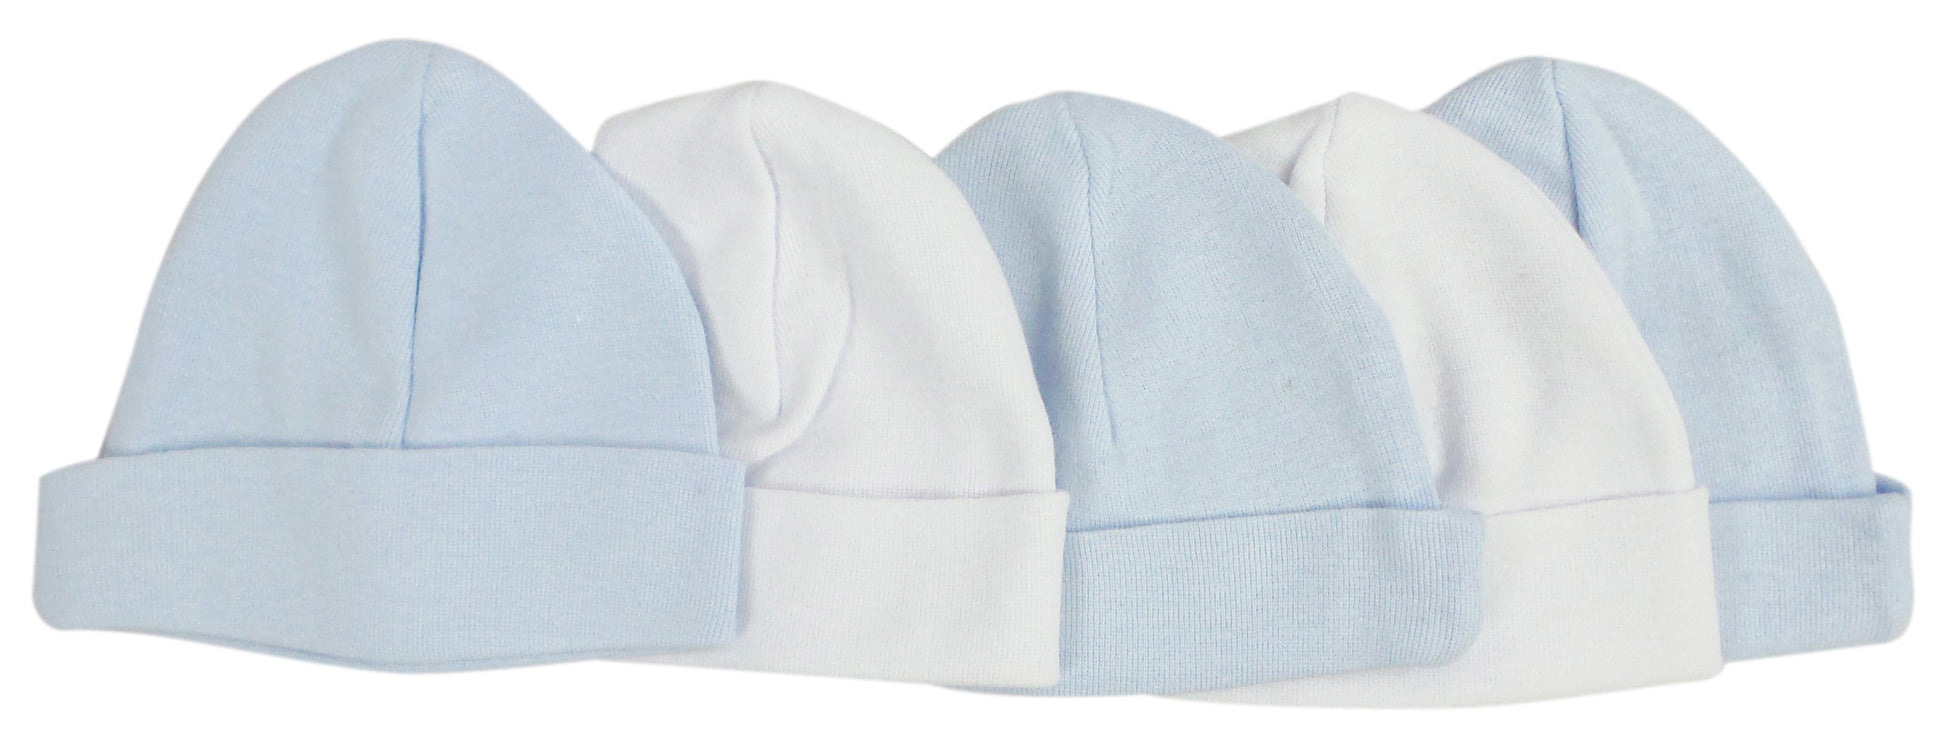 Blue & White Baby Caps (Pack of 5) 031-BLUE-3-W-2